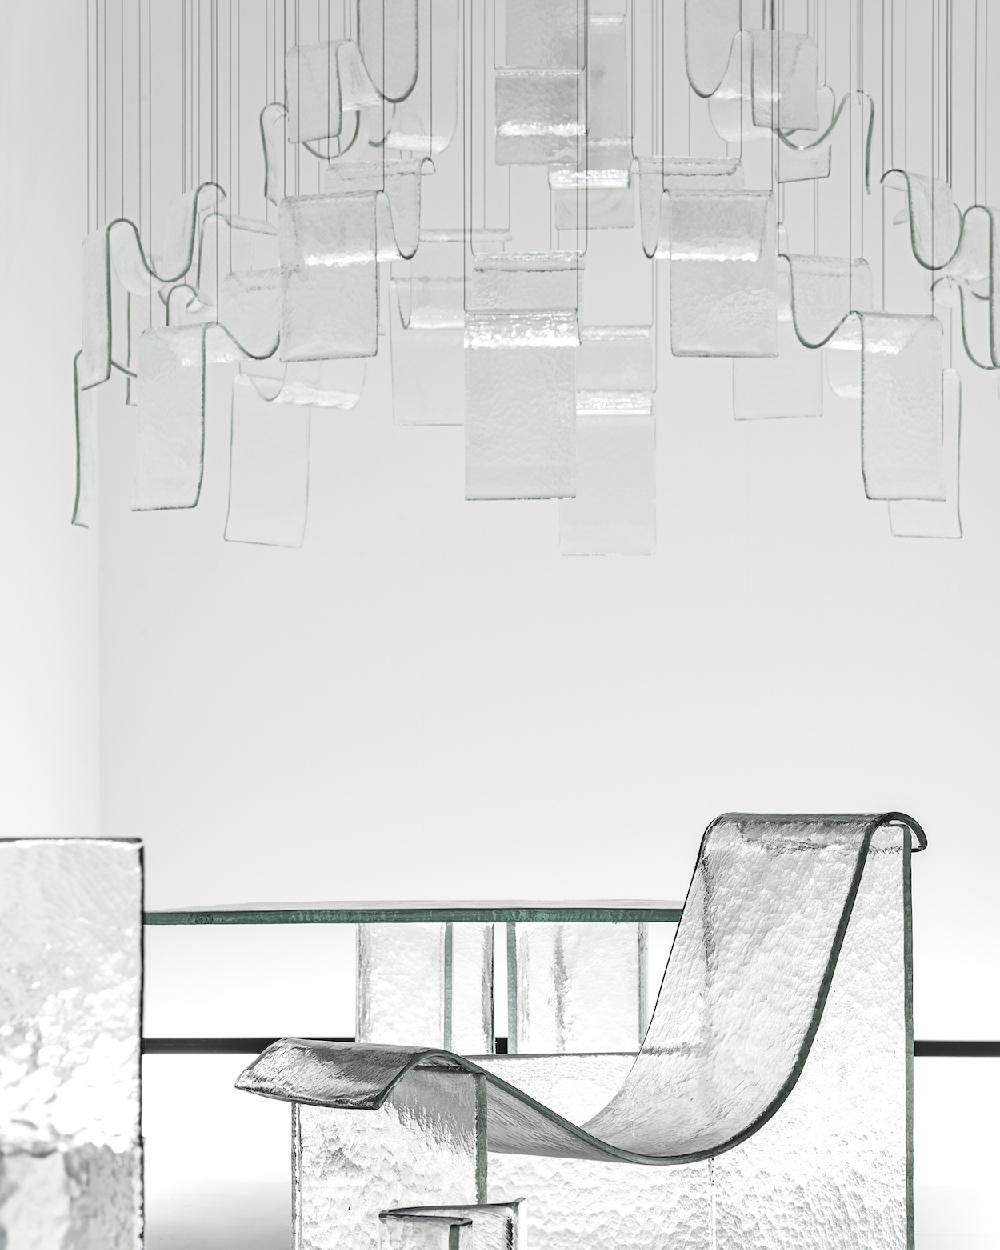 Melt is inspired by the transfiguration inherent in glass – the evolution from its incipient supple form when superheated in the furnace. The gently curved sections are made from large slabs of cast glass which, while still pliant, are laid over